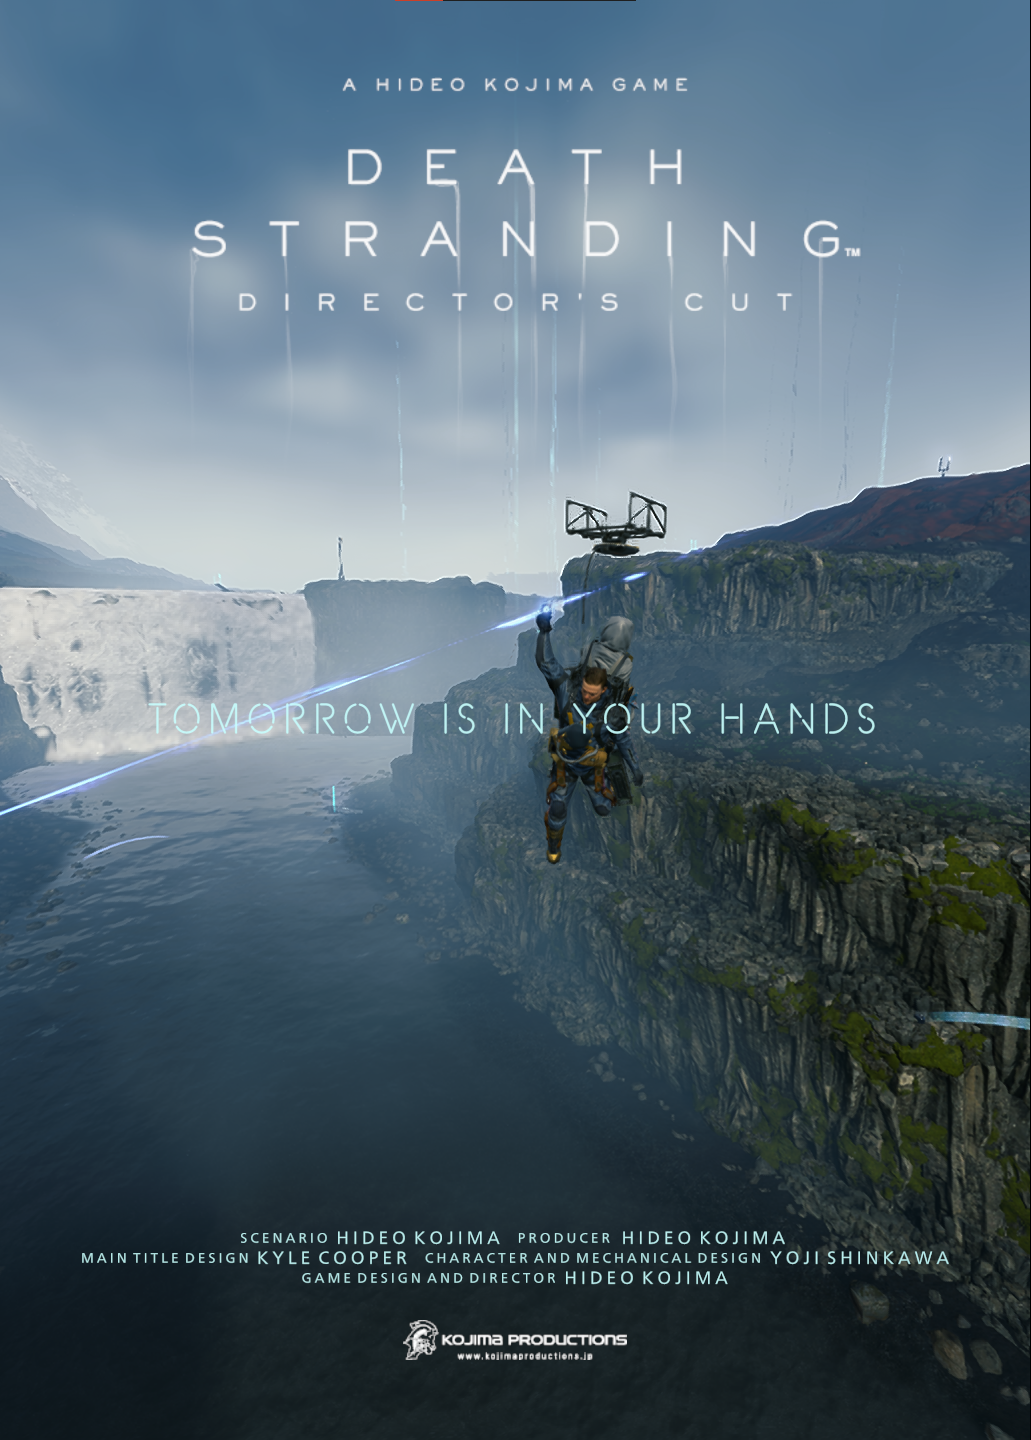 General 1031x1440 Death Stranding Director's Cut Game Gear video games video game art water portrait display title video game characters text clouds watermarked sky cliff